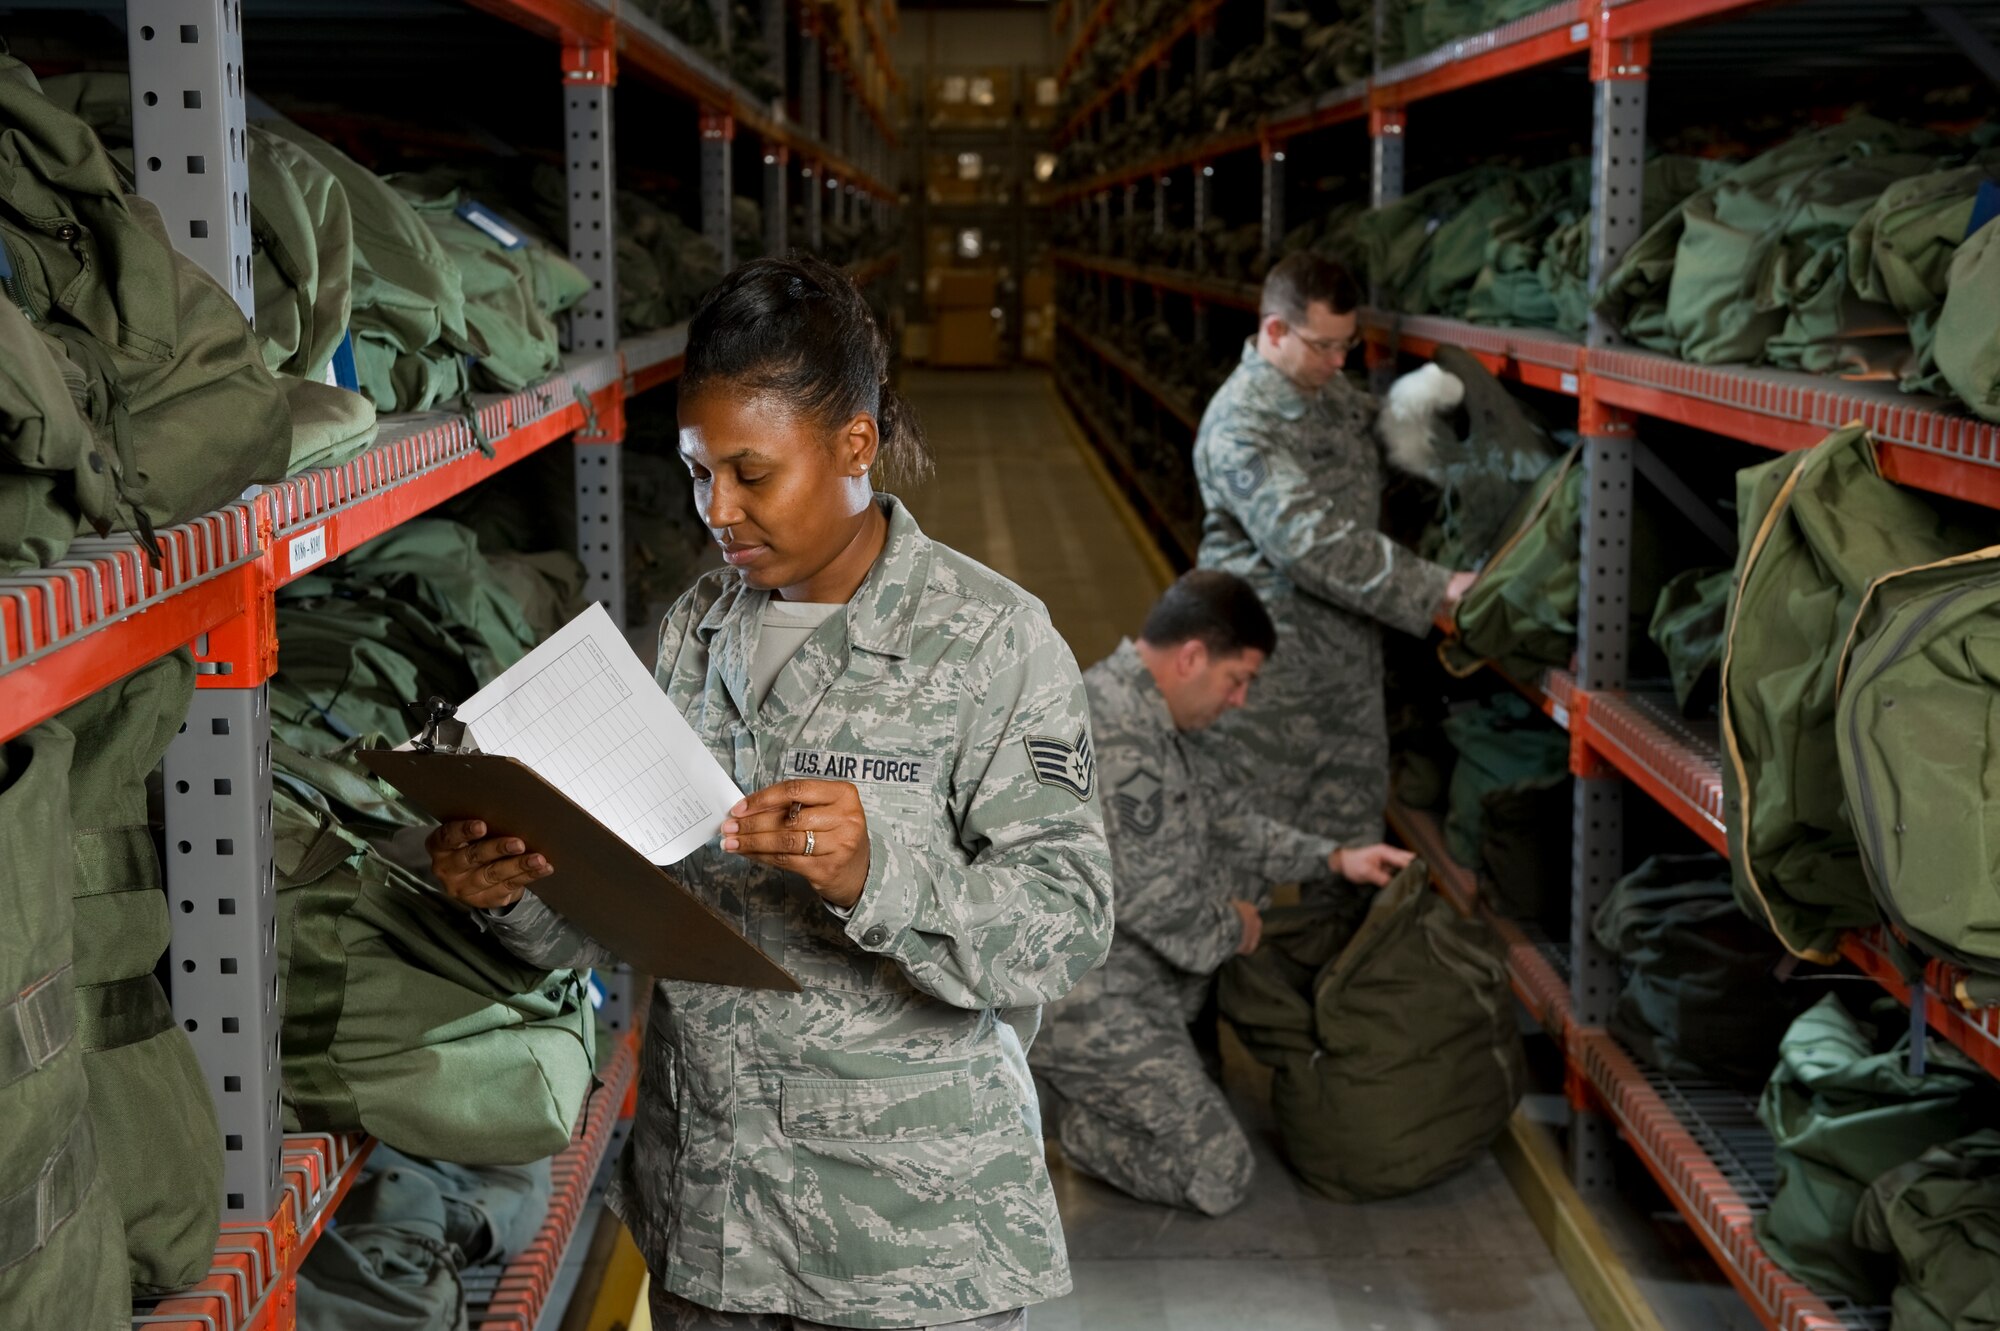 Stacy Pearsall photographed Staff Sgt. Tiffany Horry (front), Master Sgt. Steve Sherrill (kneeling), and Tech Sgt. Kris Williams (standing in back) in the Logistical Readiness Squadron’s mobility warehouse.  (Courtesy Photo by Stacy Pearsall)